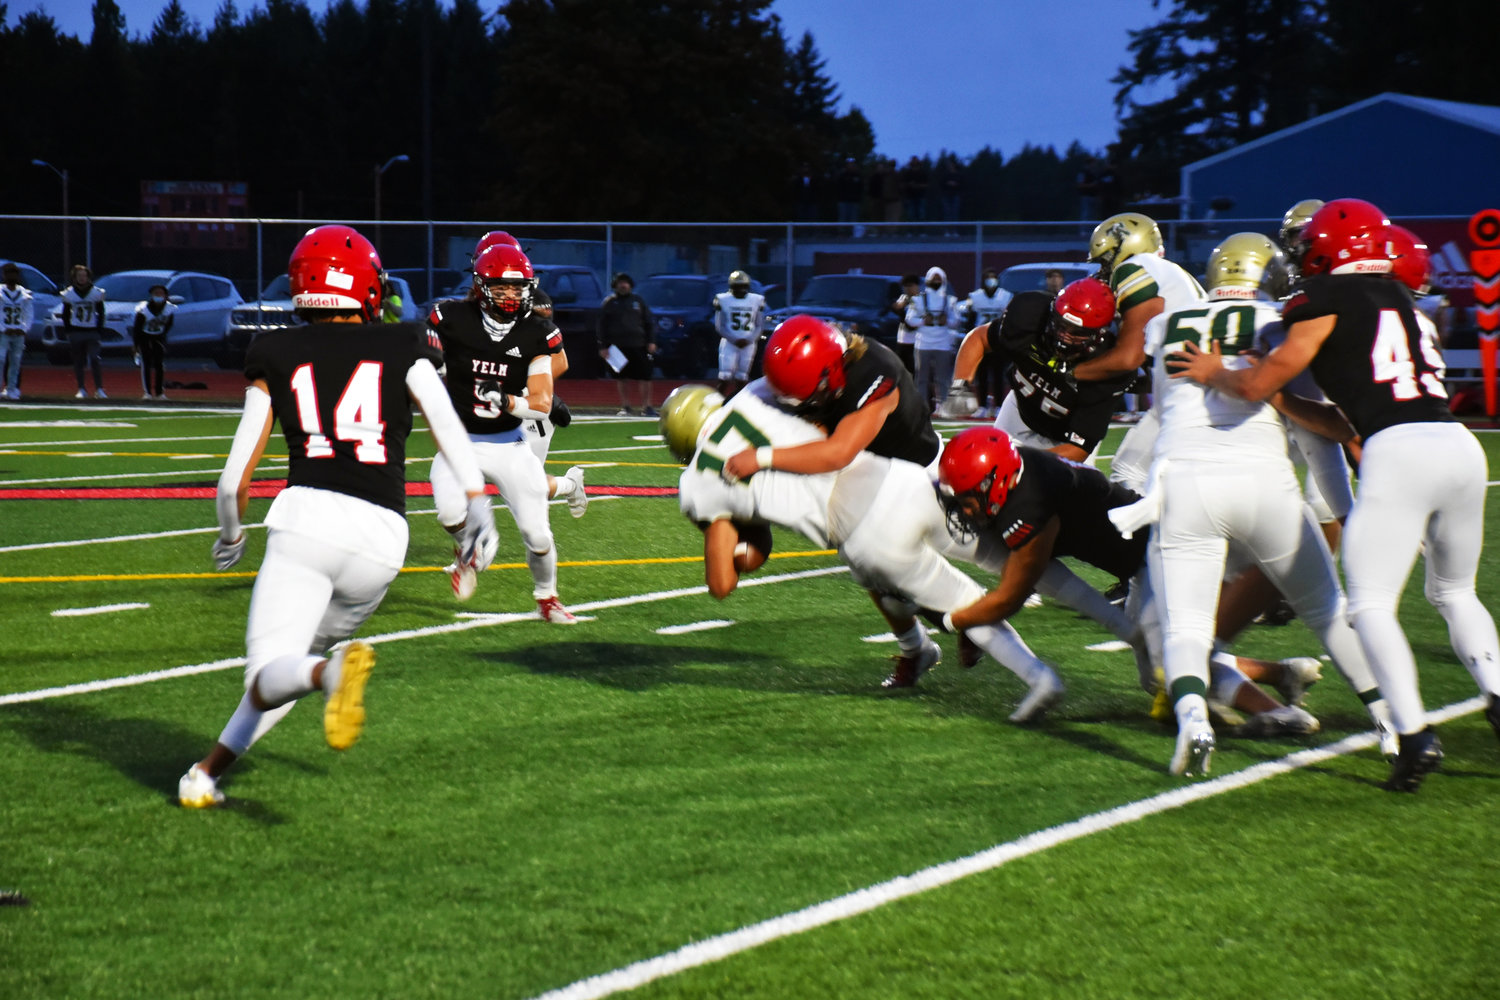 Yelm players take down a Timberline player on Friday, Sept. 17 at home.